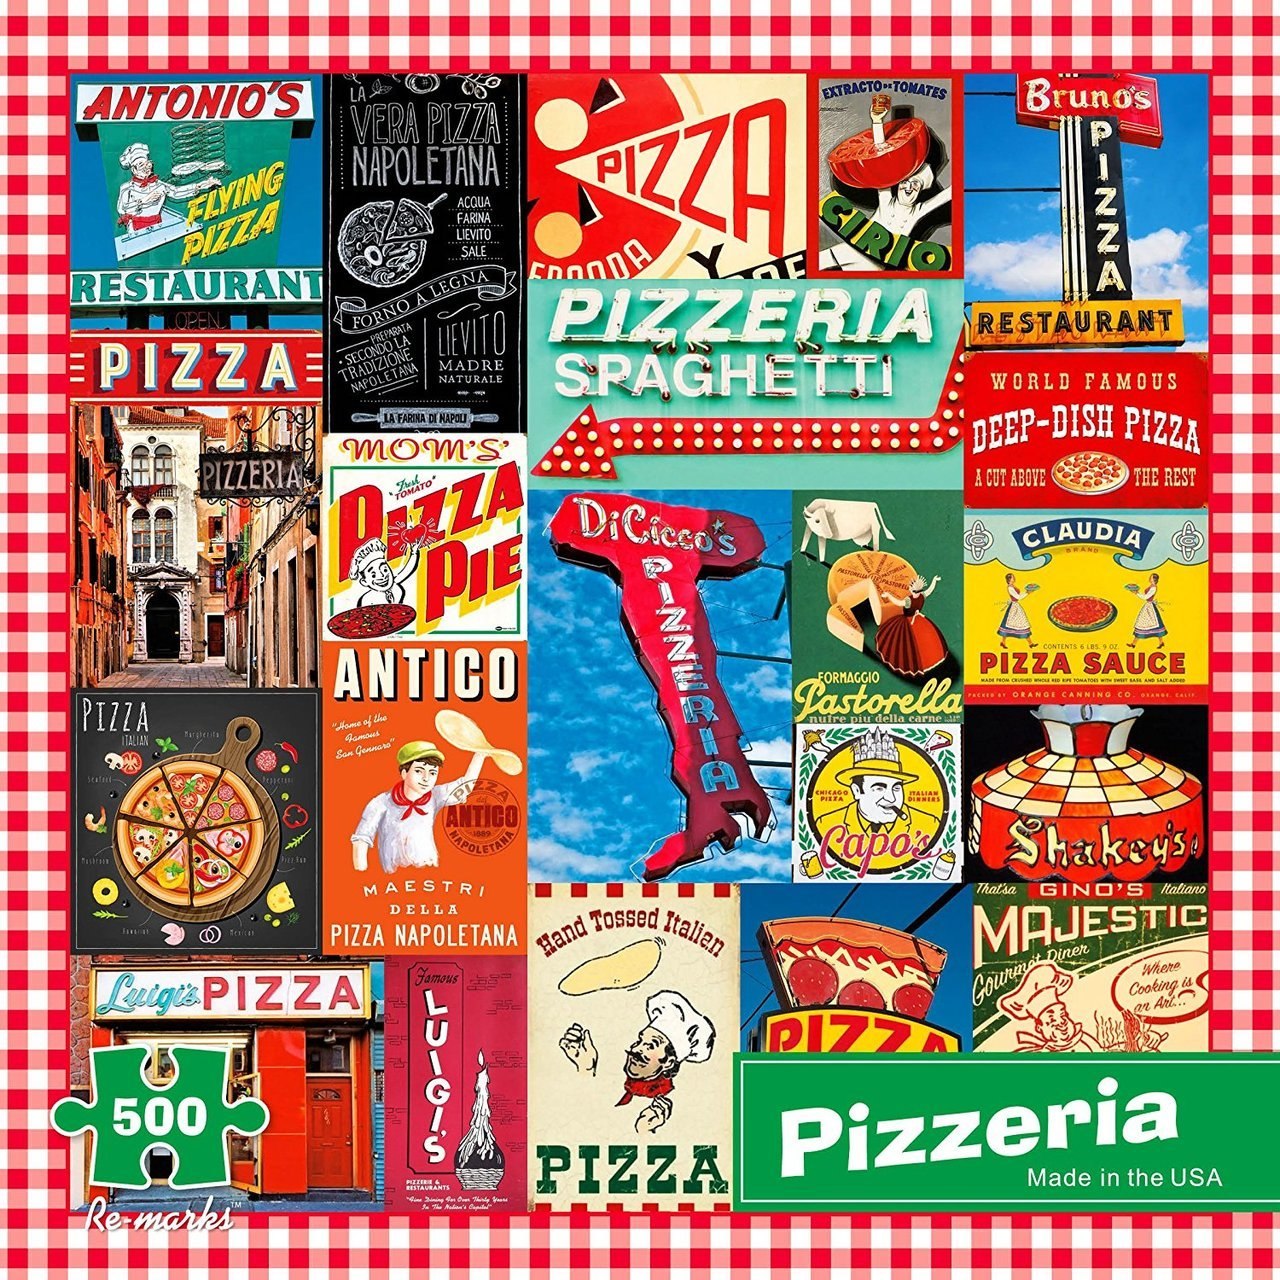 Pizzeria - 500pc Jigsaw Puzzle By Re-marks  			  					NEW